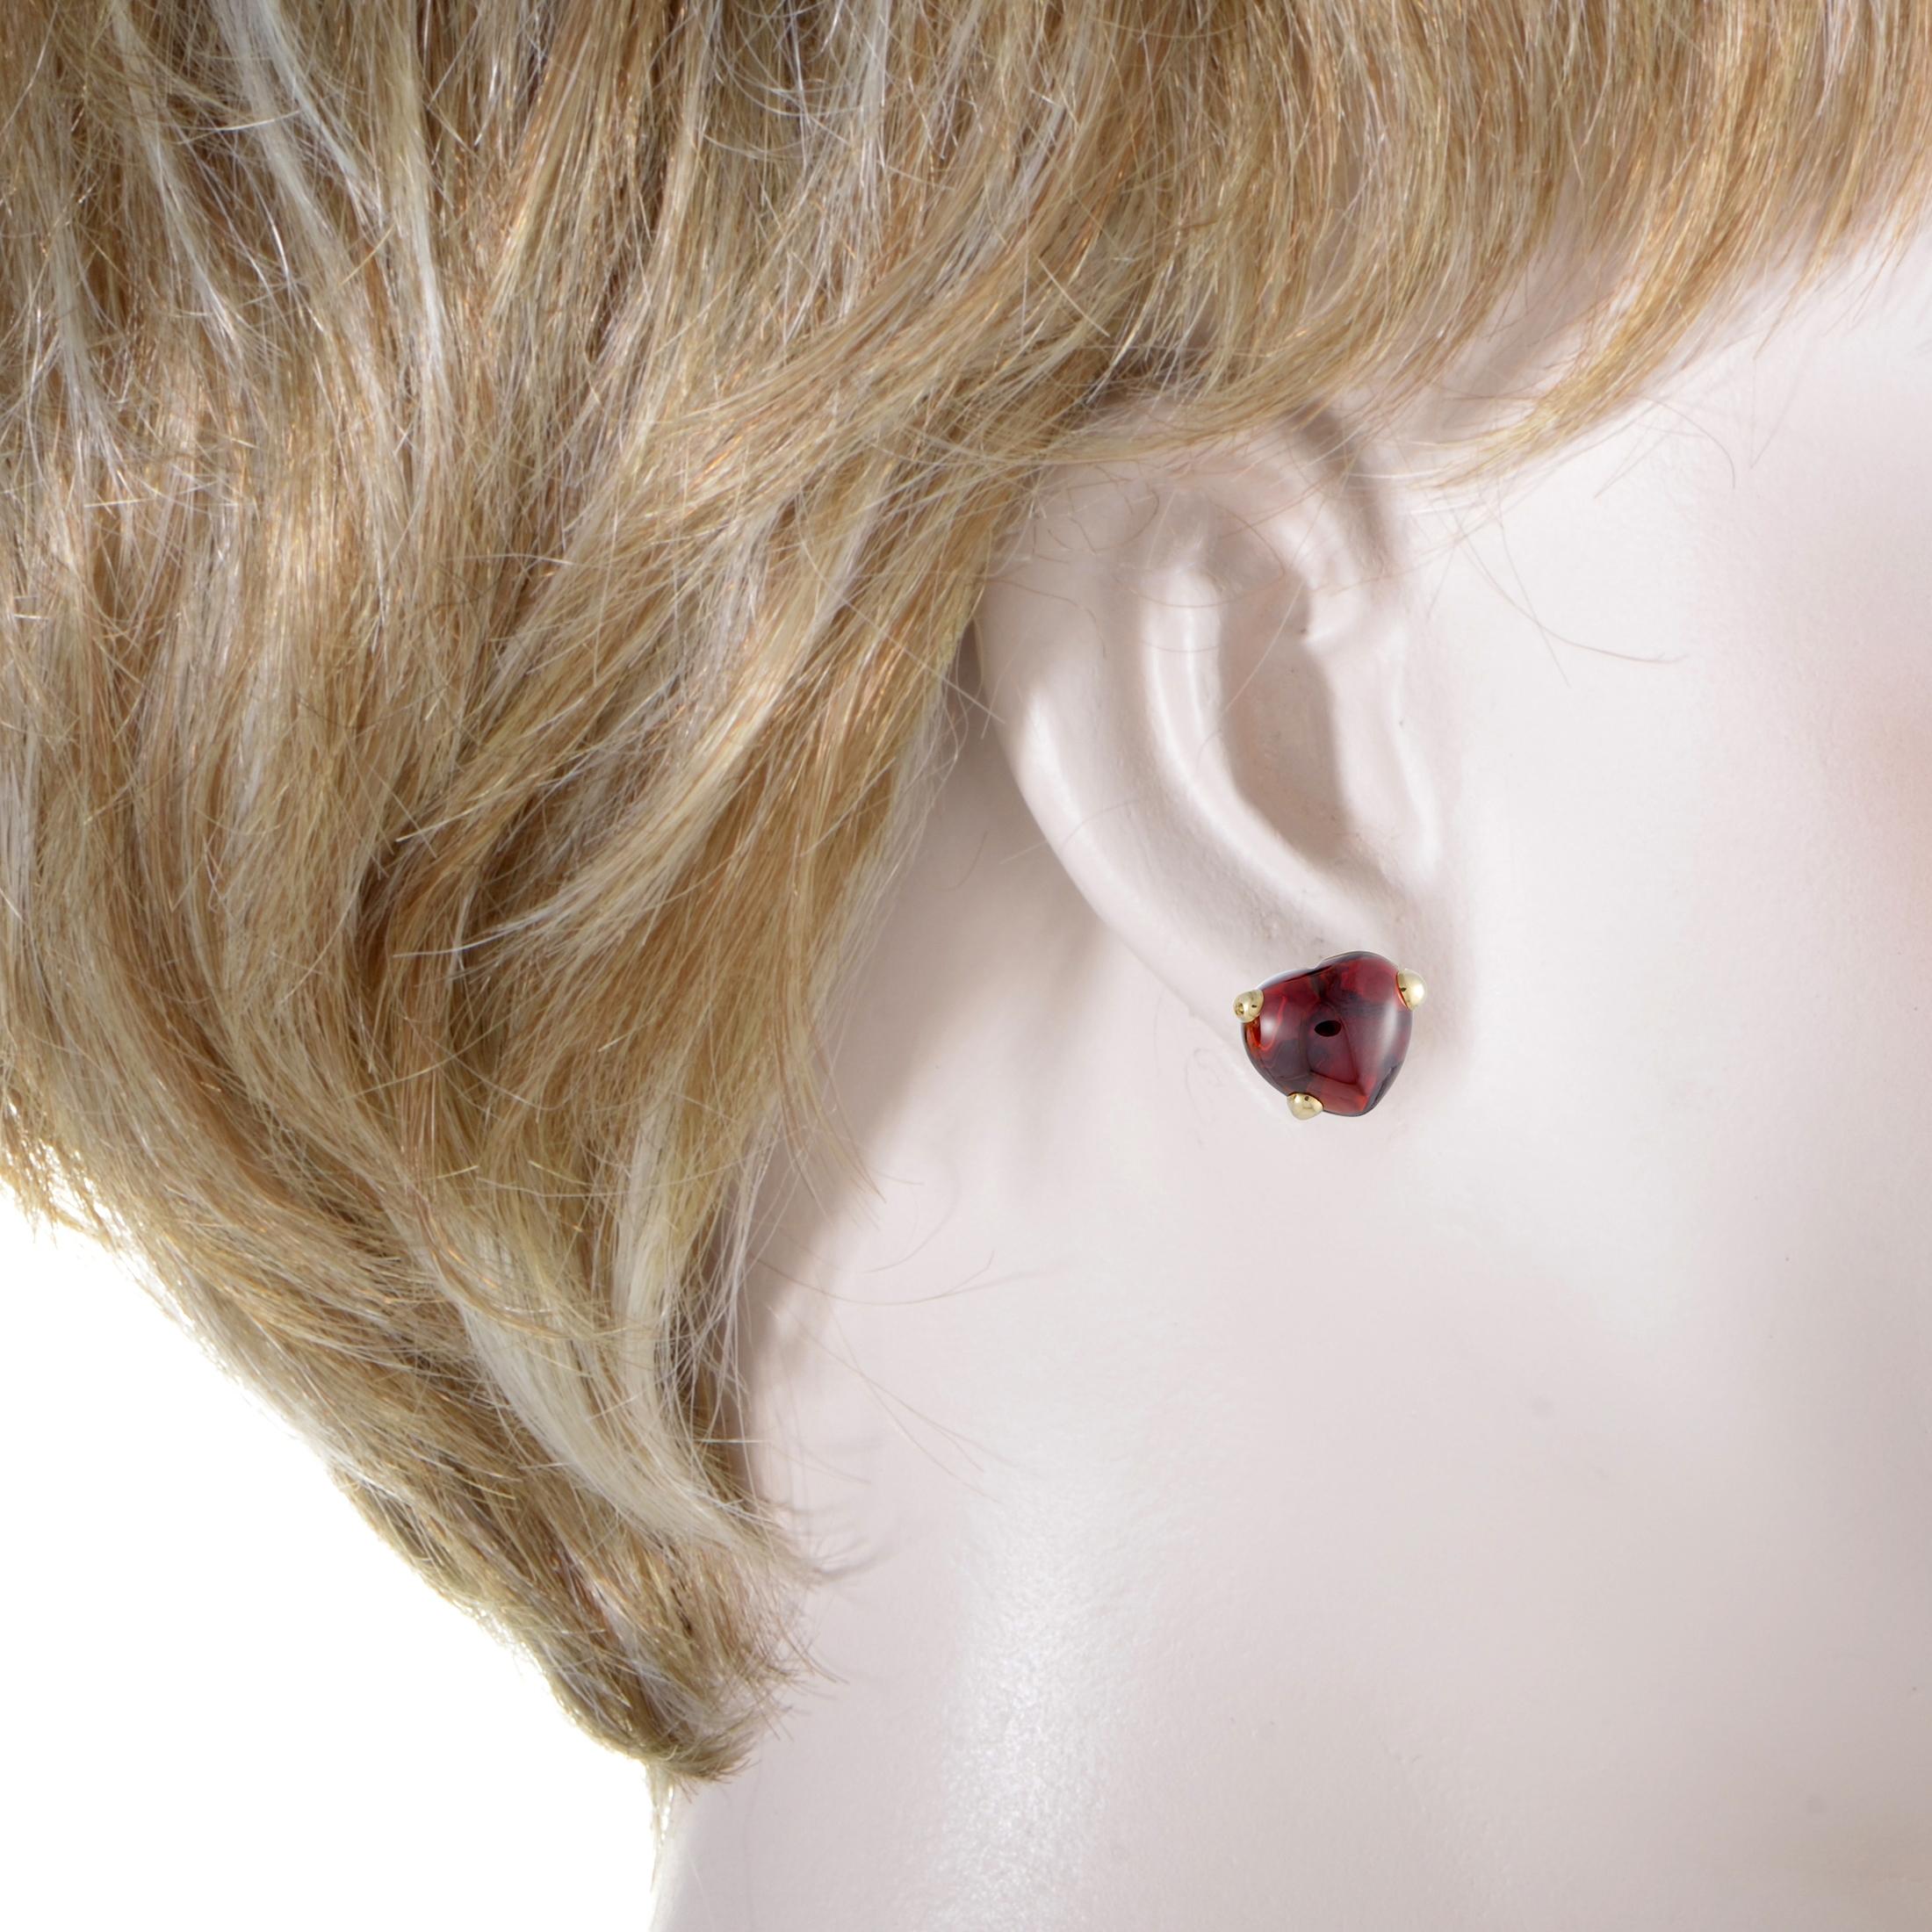 The enchantingly radiant gold and the incredibly eye-catching garnet produce an exceptionally attractive effect in these splendid Pomellato earrings. The pair is crafted from 18K yellow gold and each of the two earrings weighs 9.55 grams.